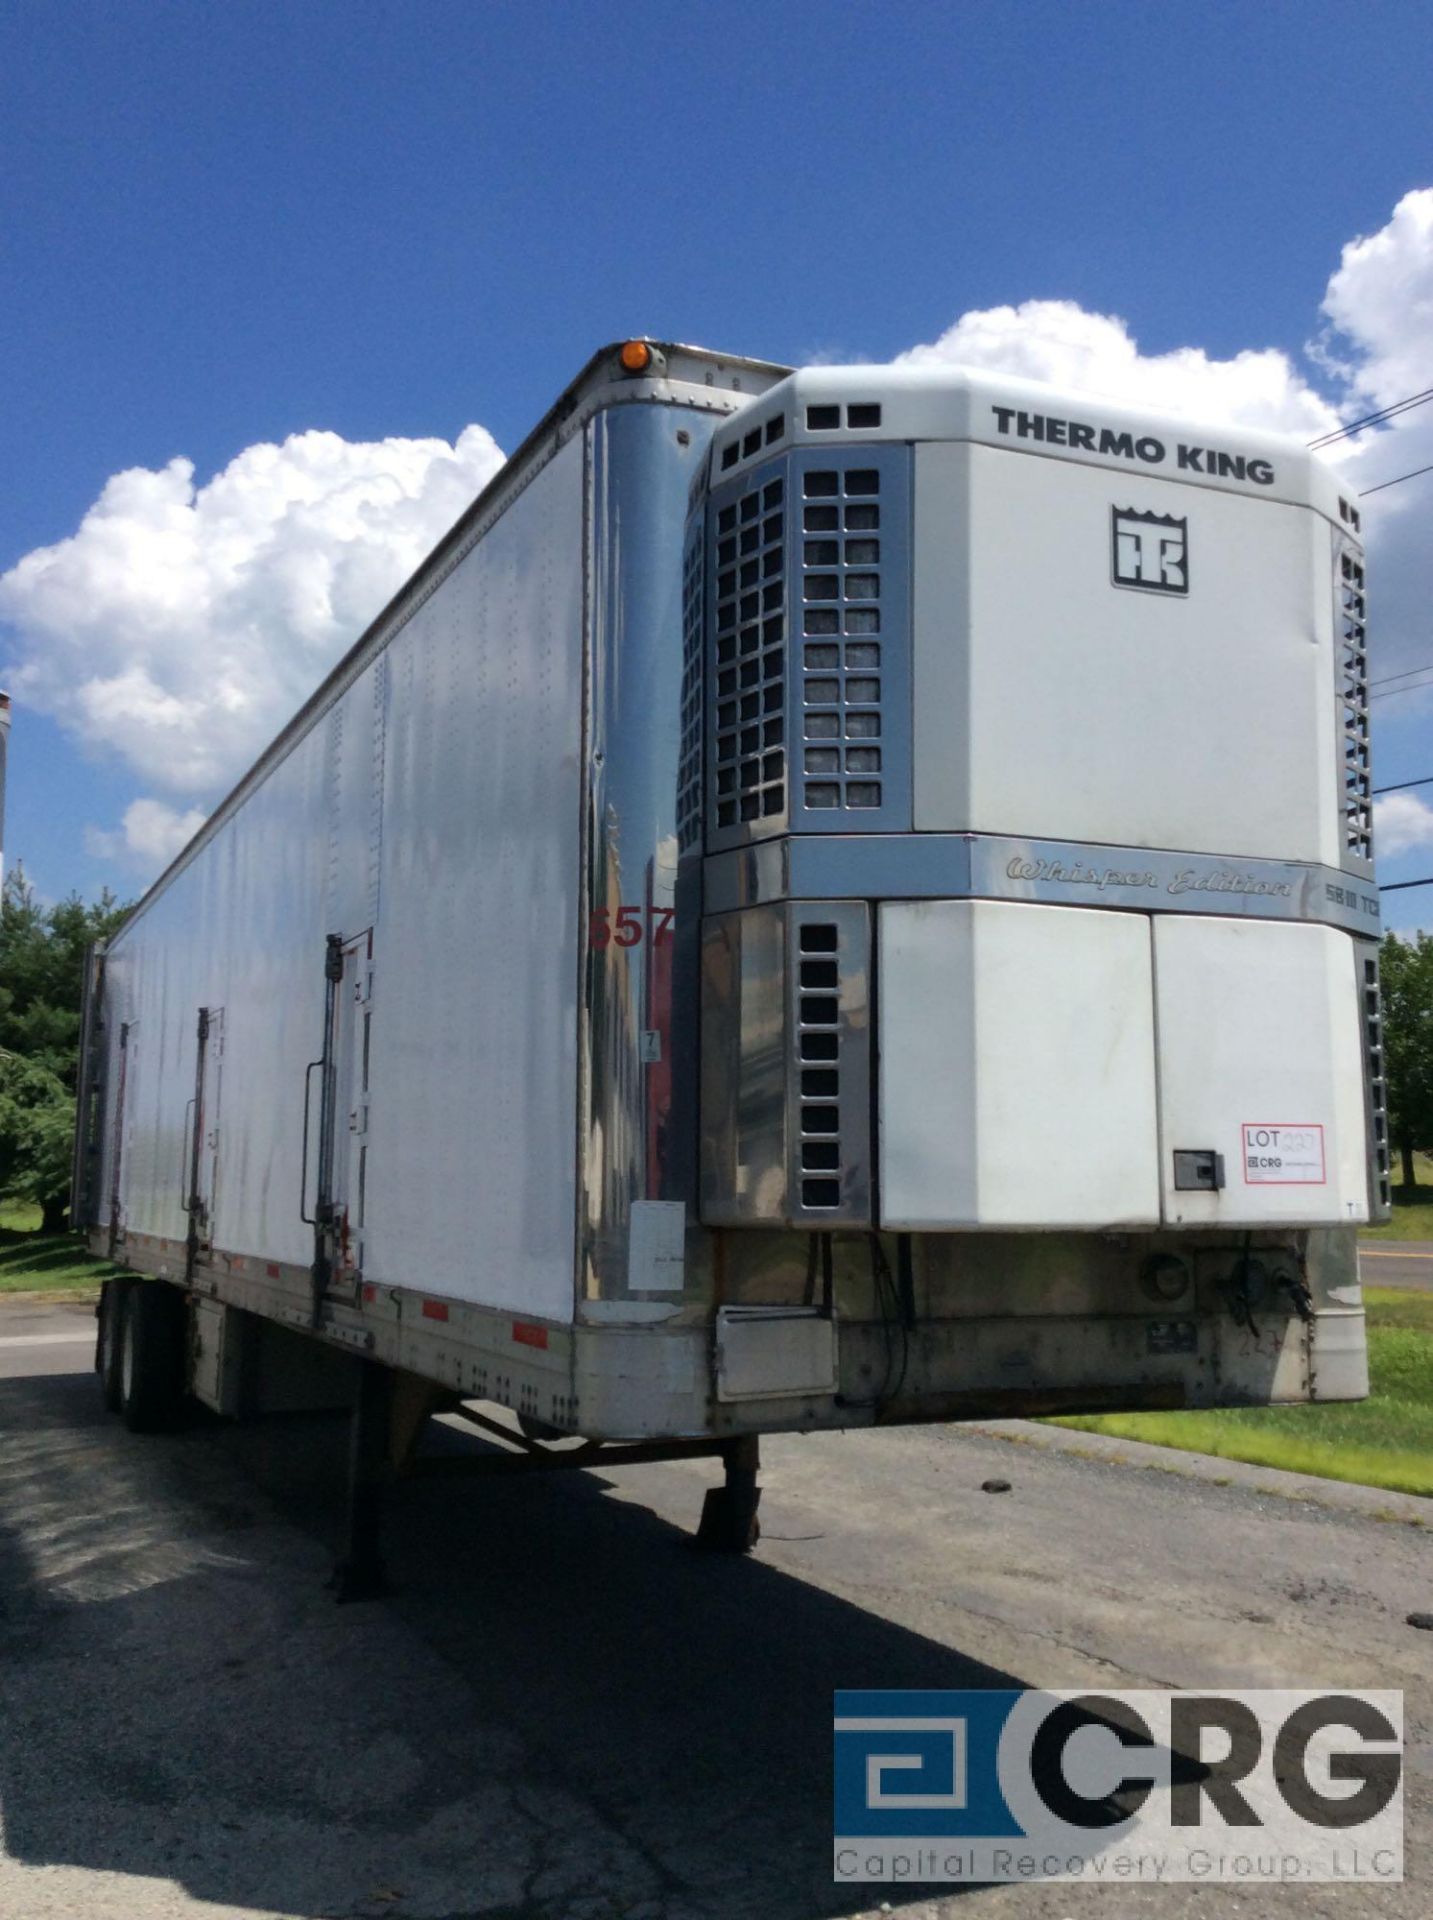 2002 Trailmobile Multi Temp Refrigerated Semi Trailer - 43 Long, 96" wide, Thermo King SBIII TCI- - Image 3 of 5